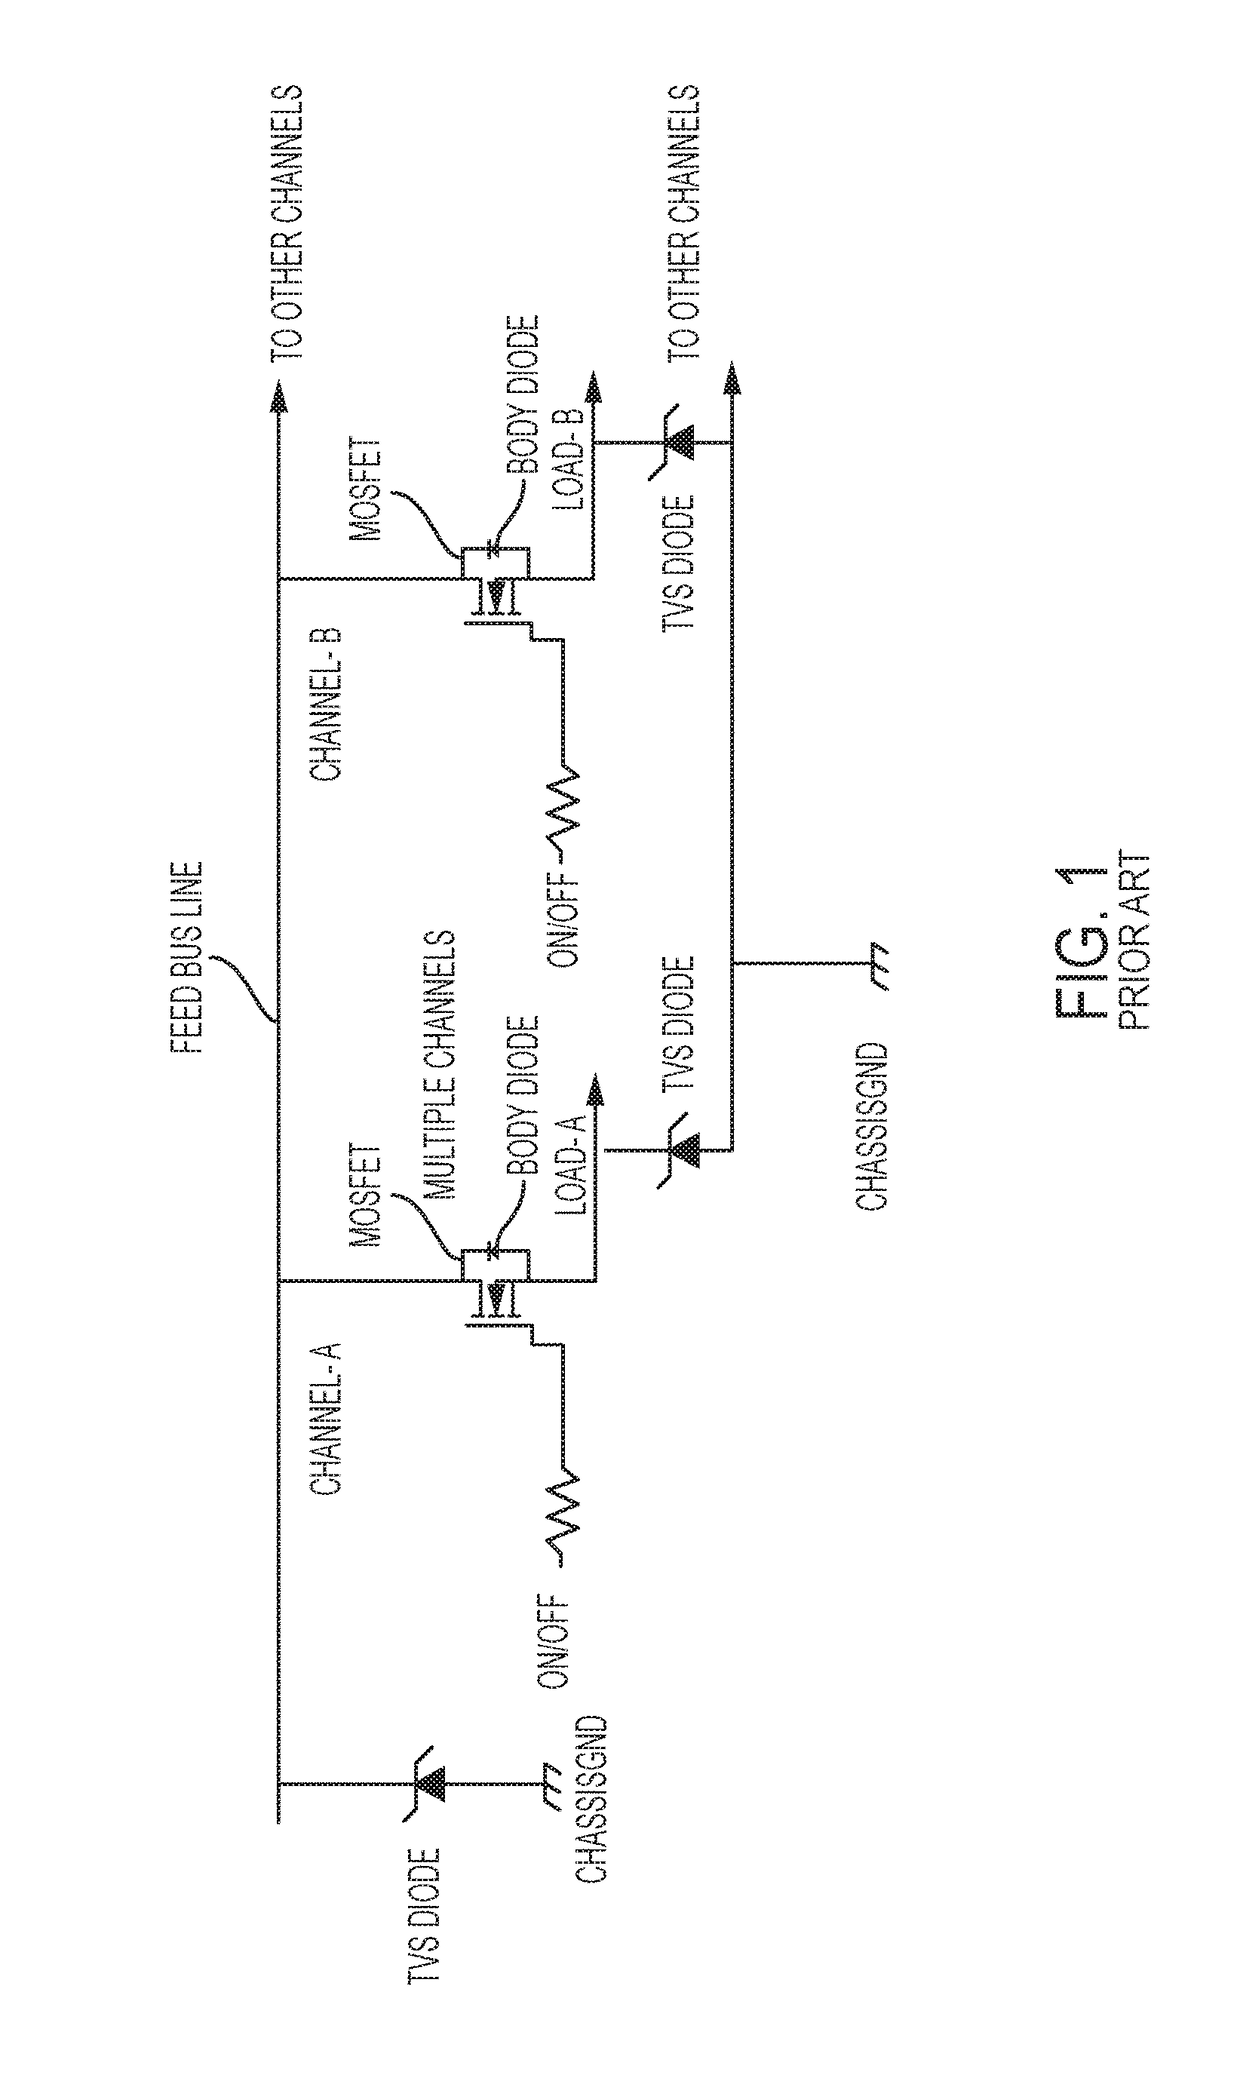 Transient voltage suppressor having built-in-test capability for solid state power controllers